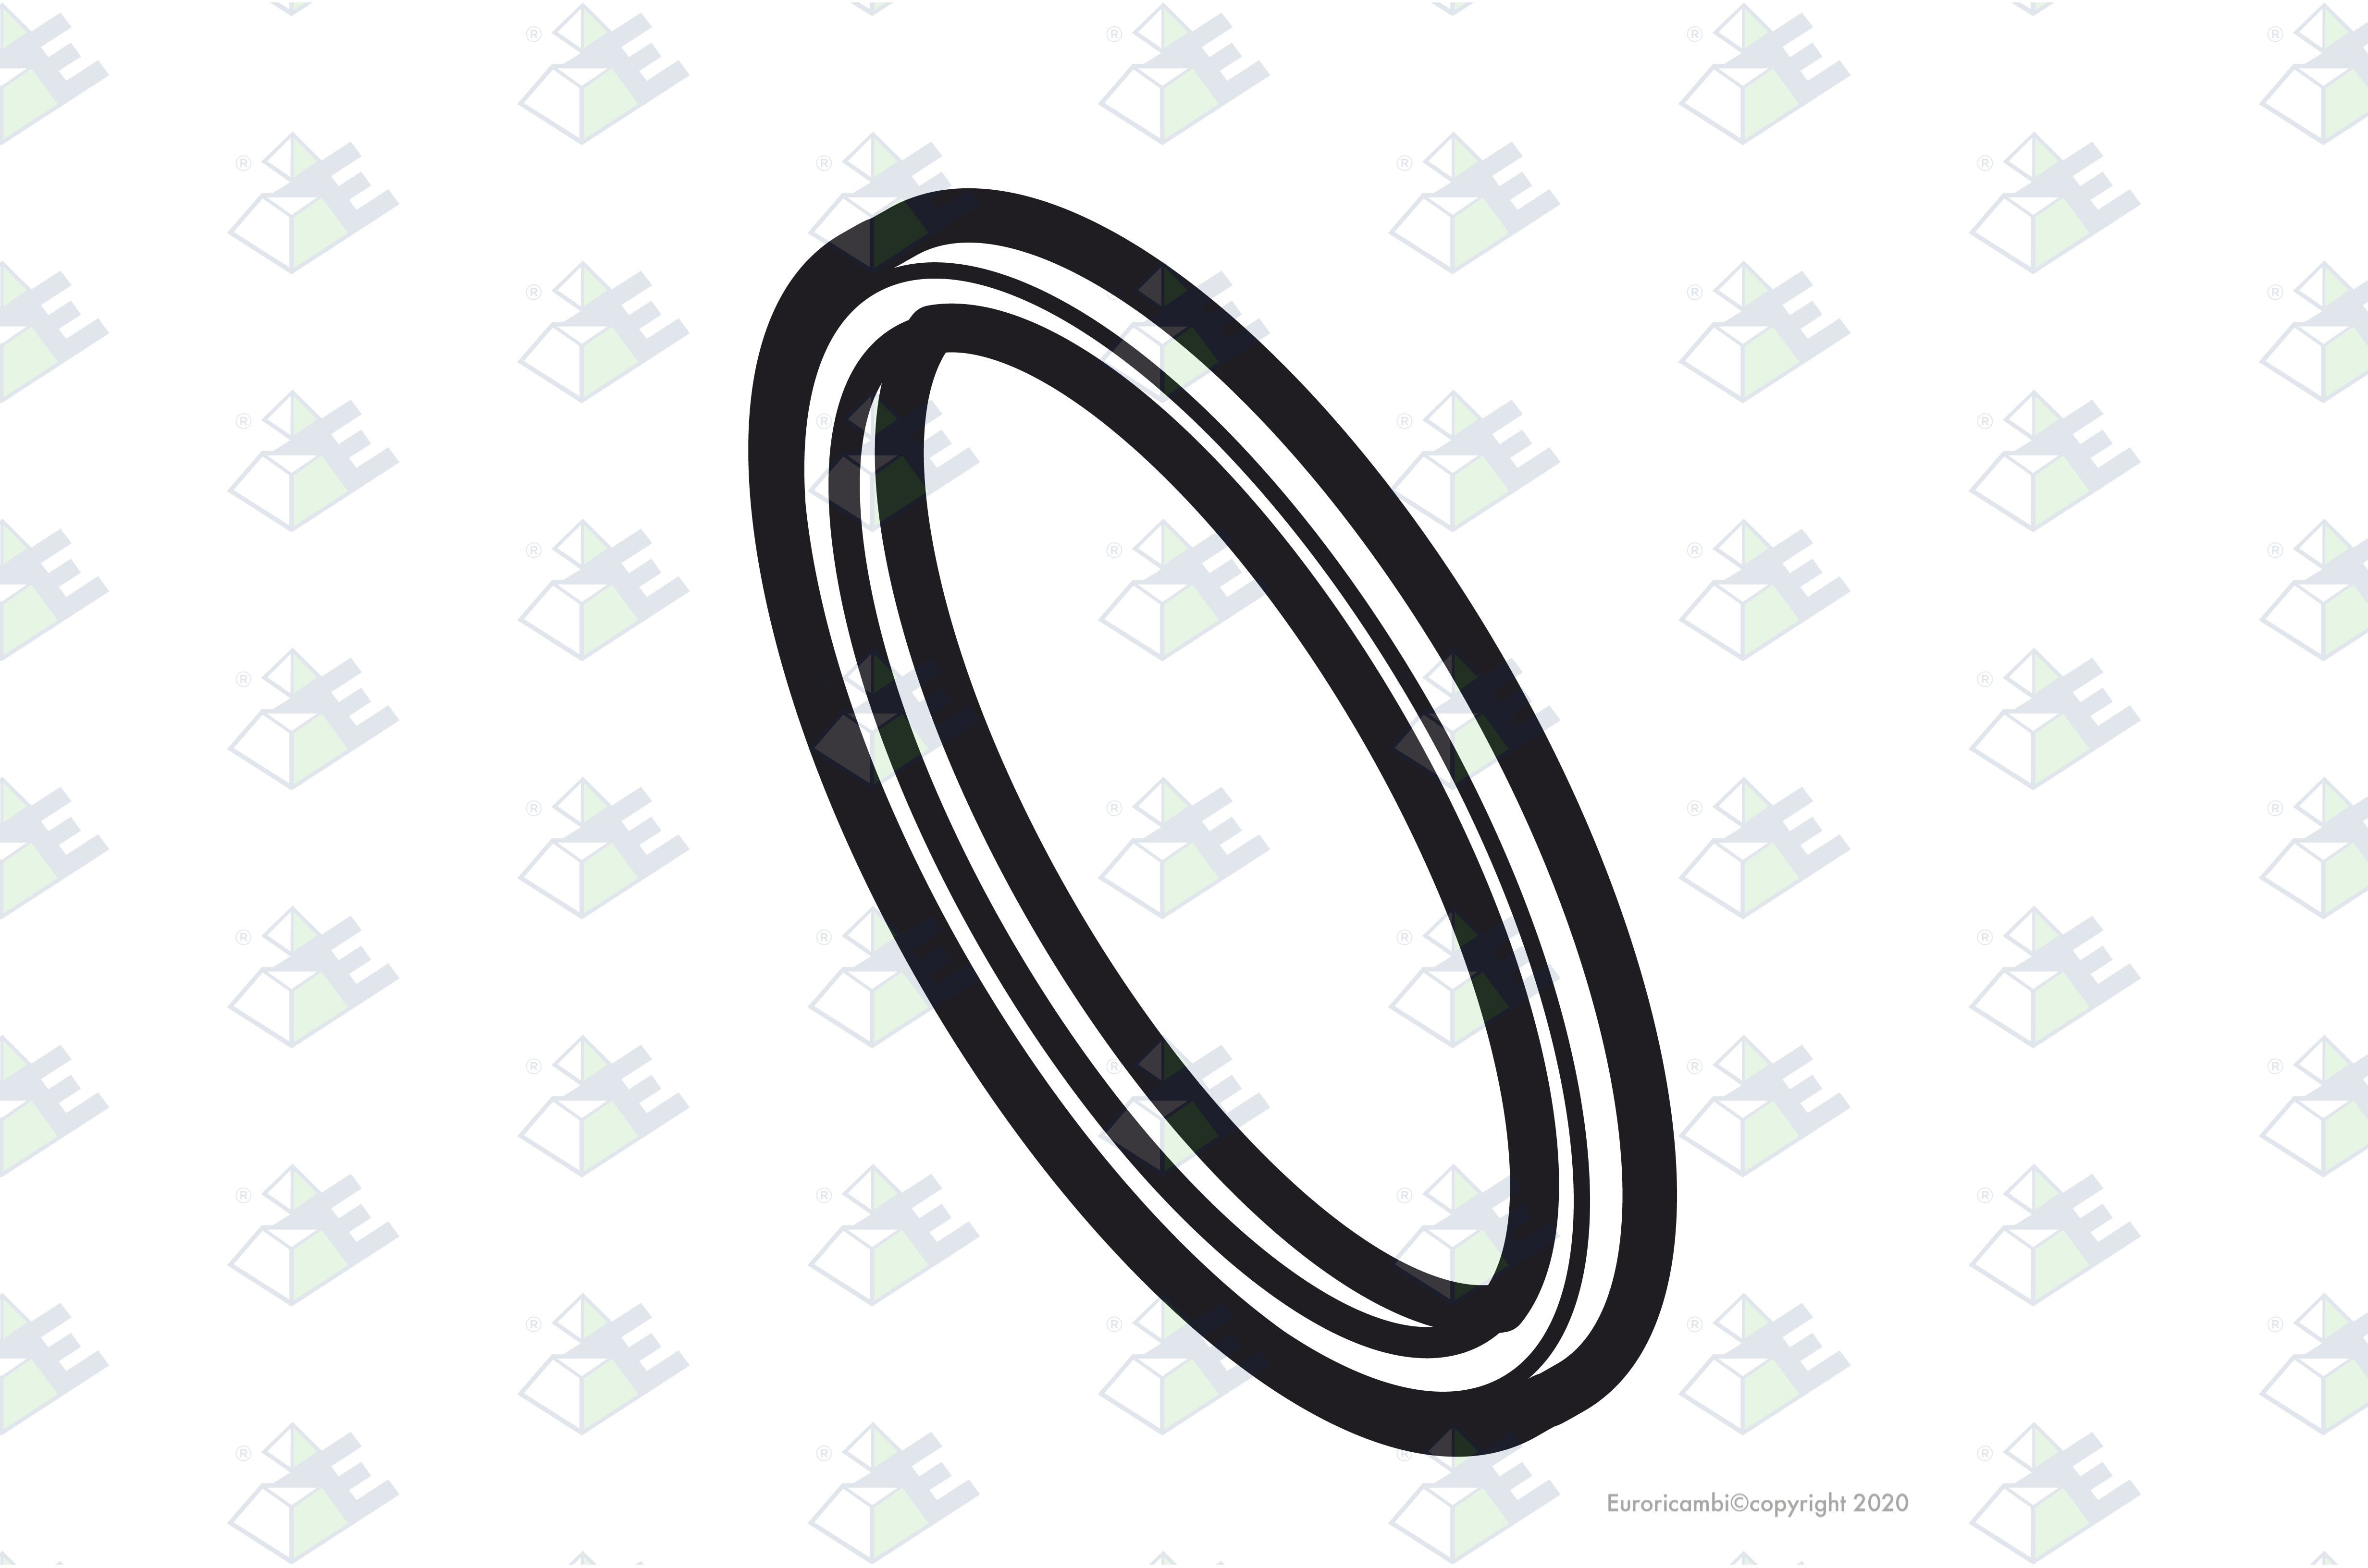 SHIM 0,50 MM suitable to S C A N I A 216185